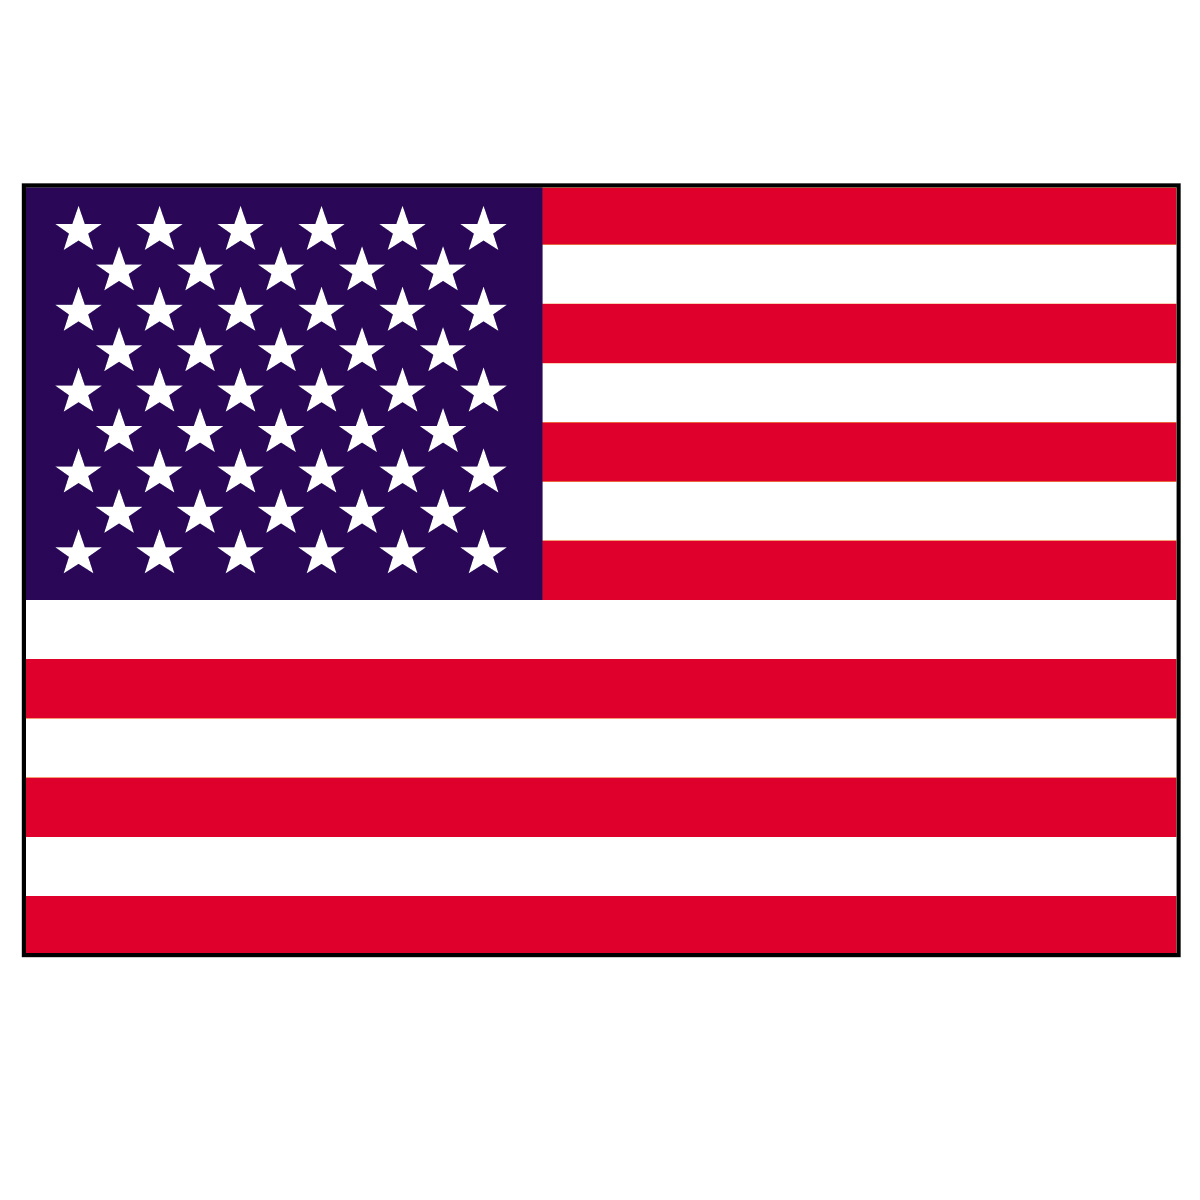 United States America Flag   Clipart Panda   Free Clipart Images